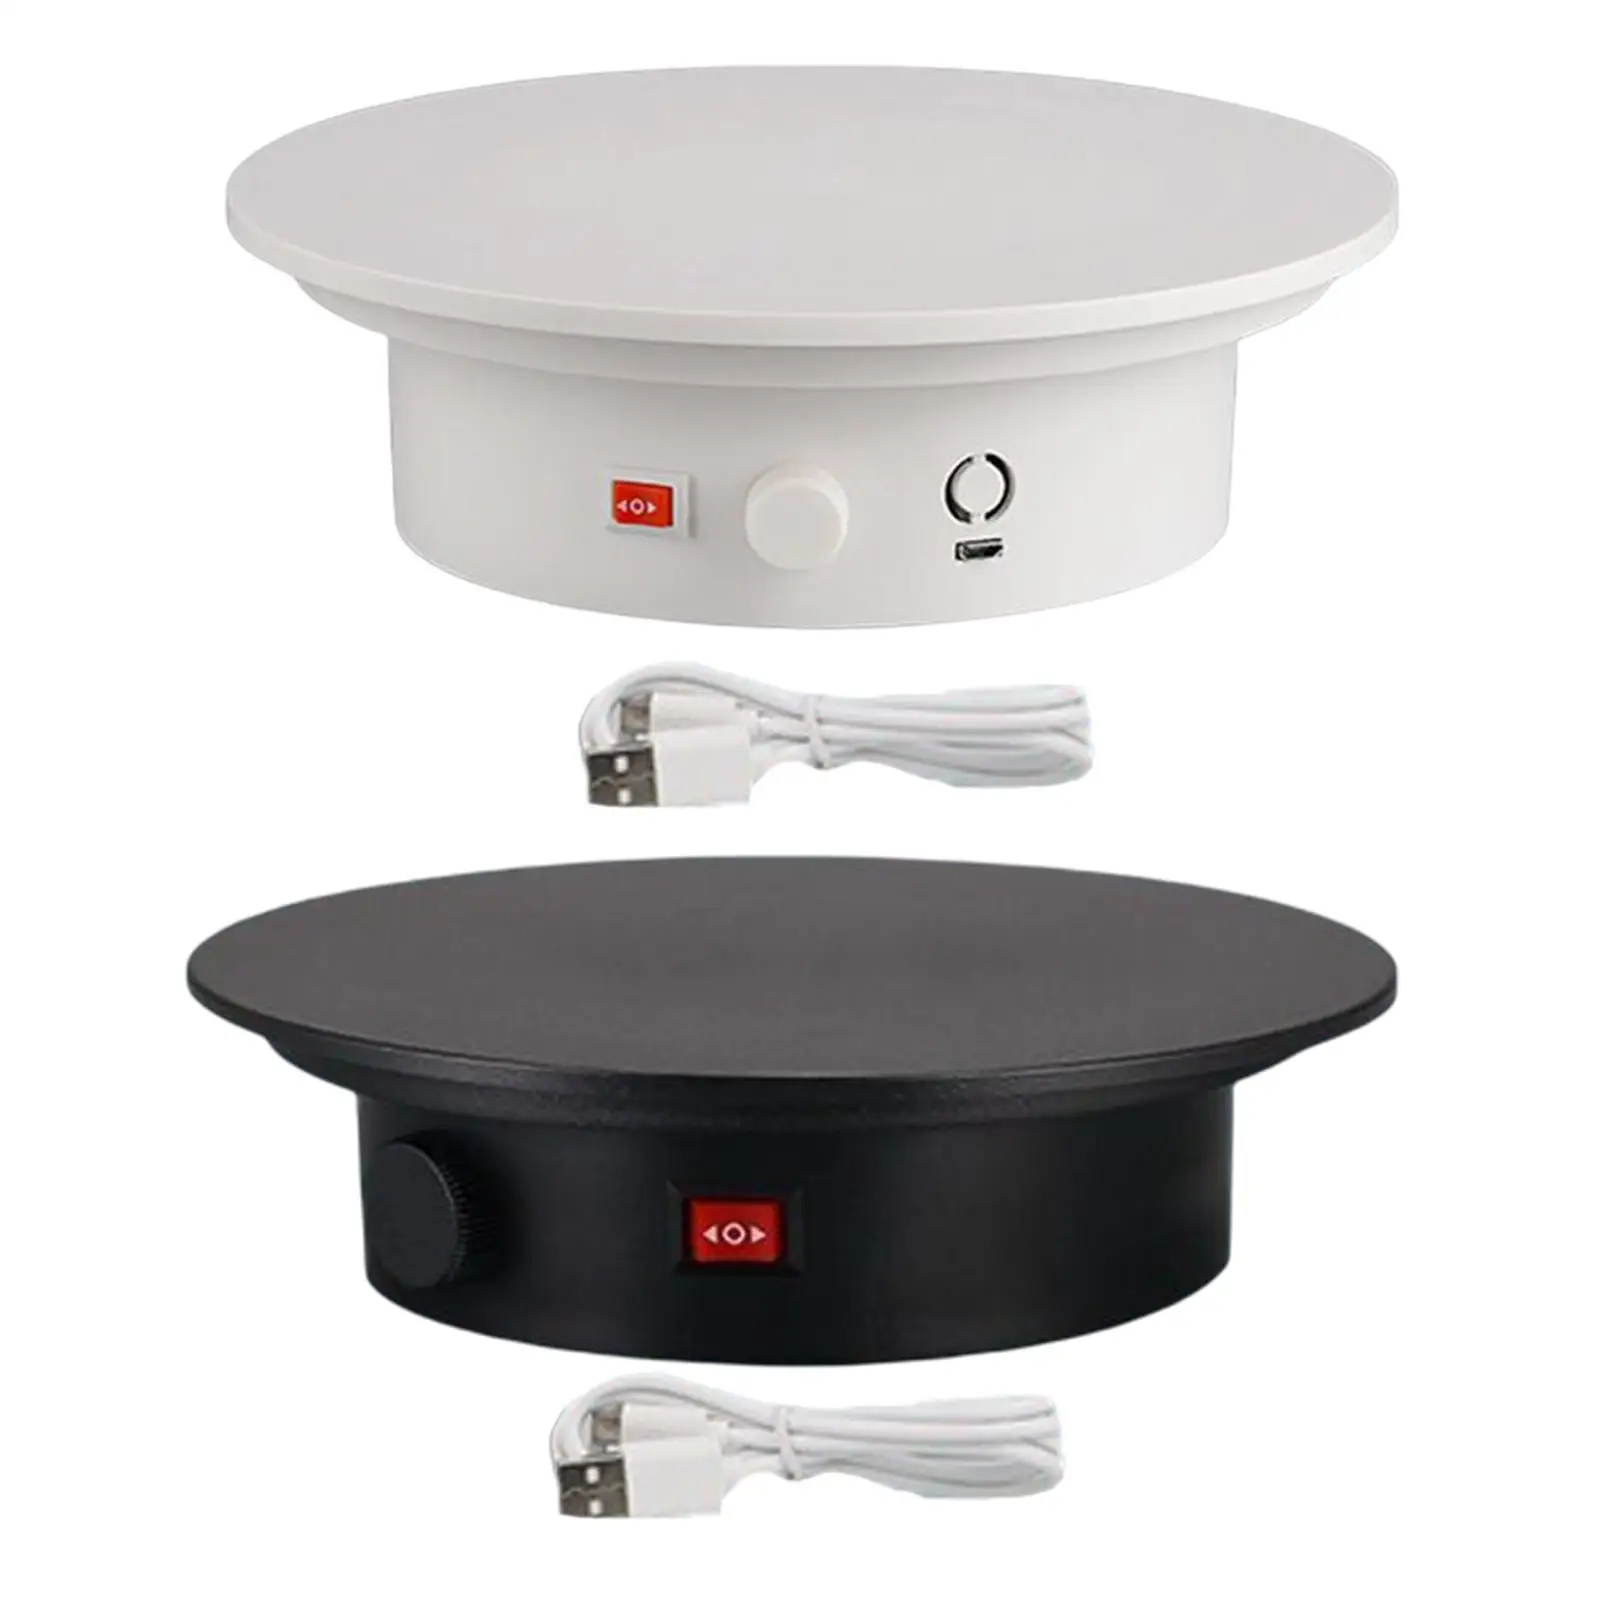 Electric Rotating Display Stand 360 Degree Turntable Jewelry Holder for Photography Live Video Prop